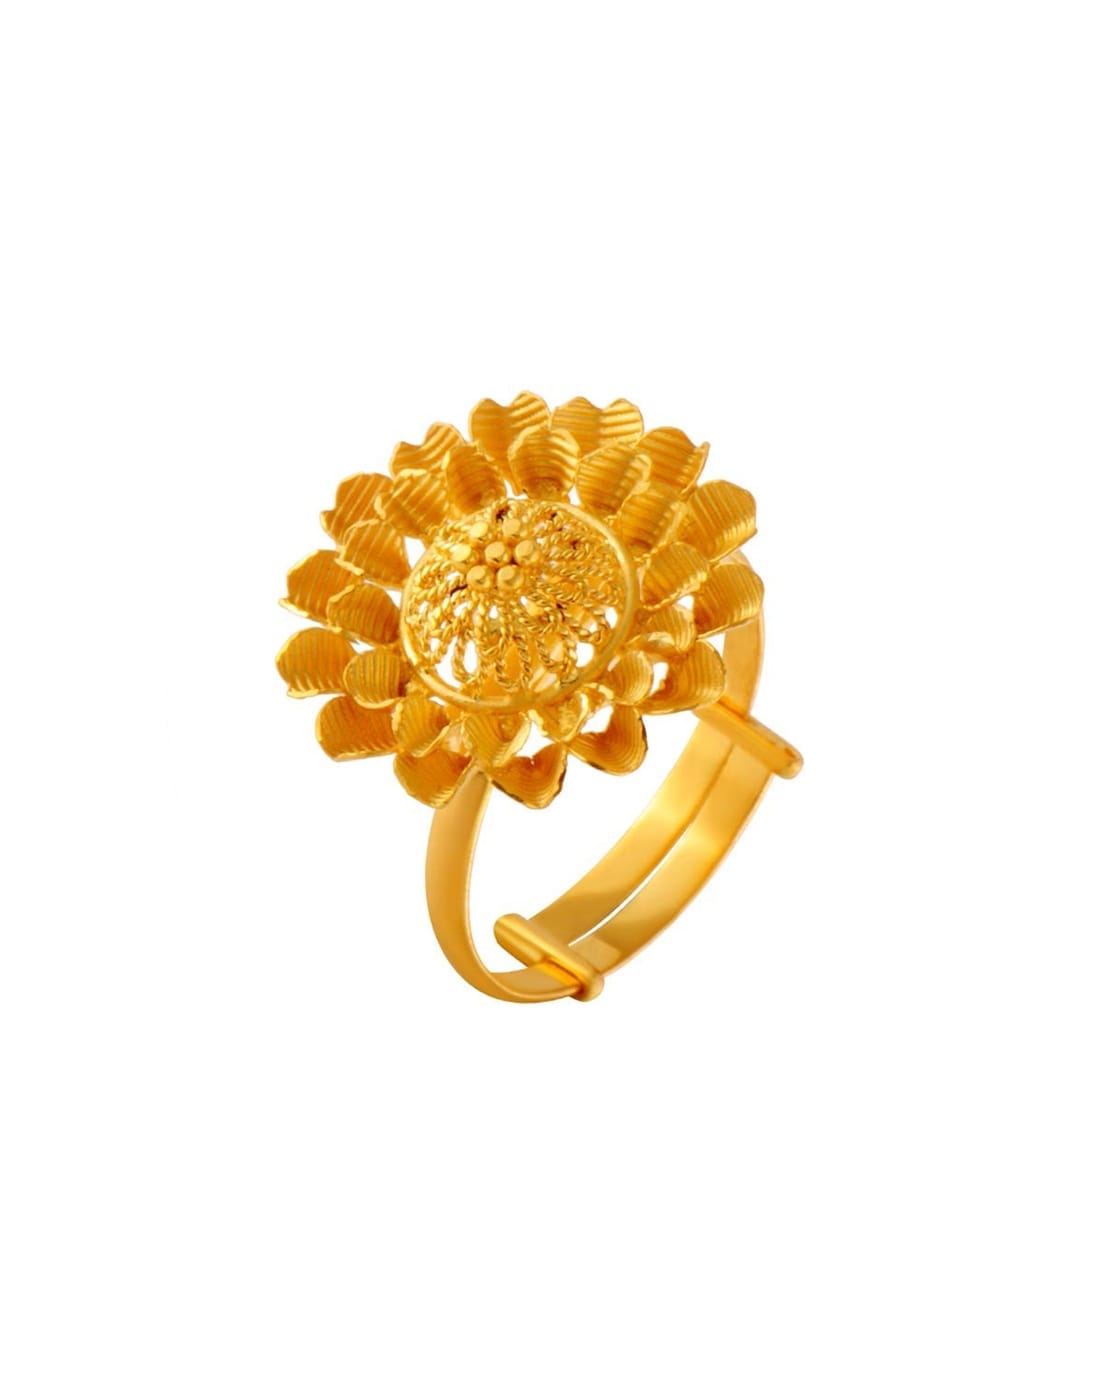 14kt Yellow Gold Flower Ring with Blue Montana Sapphire | Shelly Bermont  Fine Jewelry